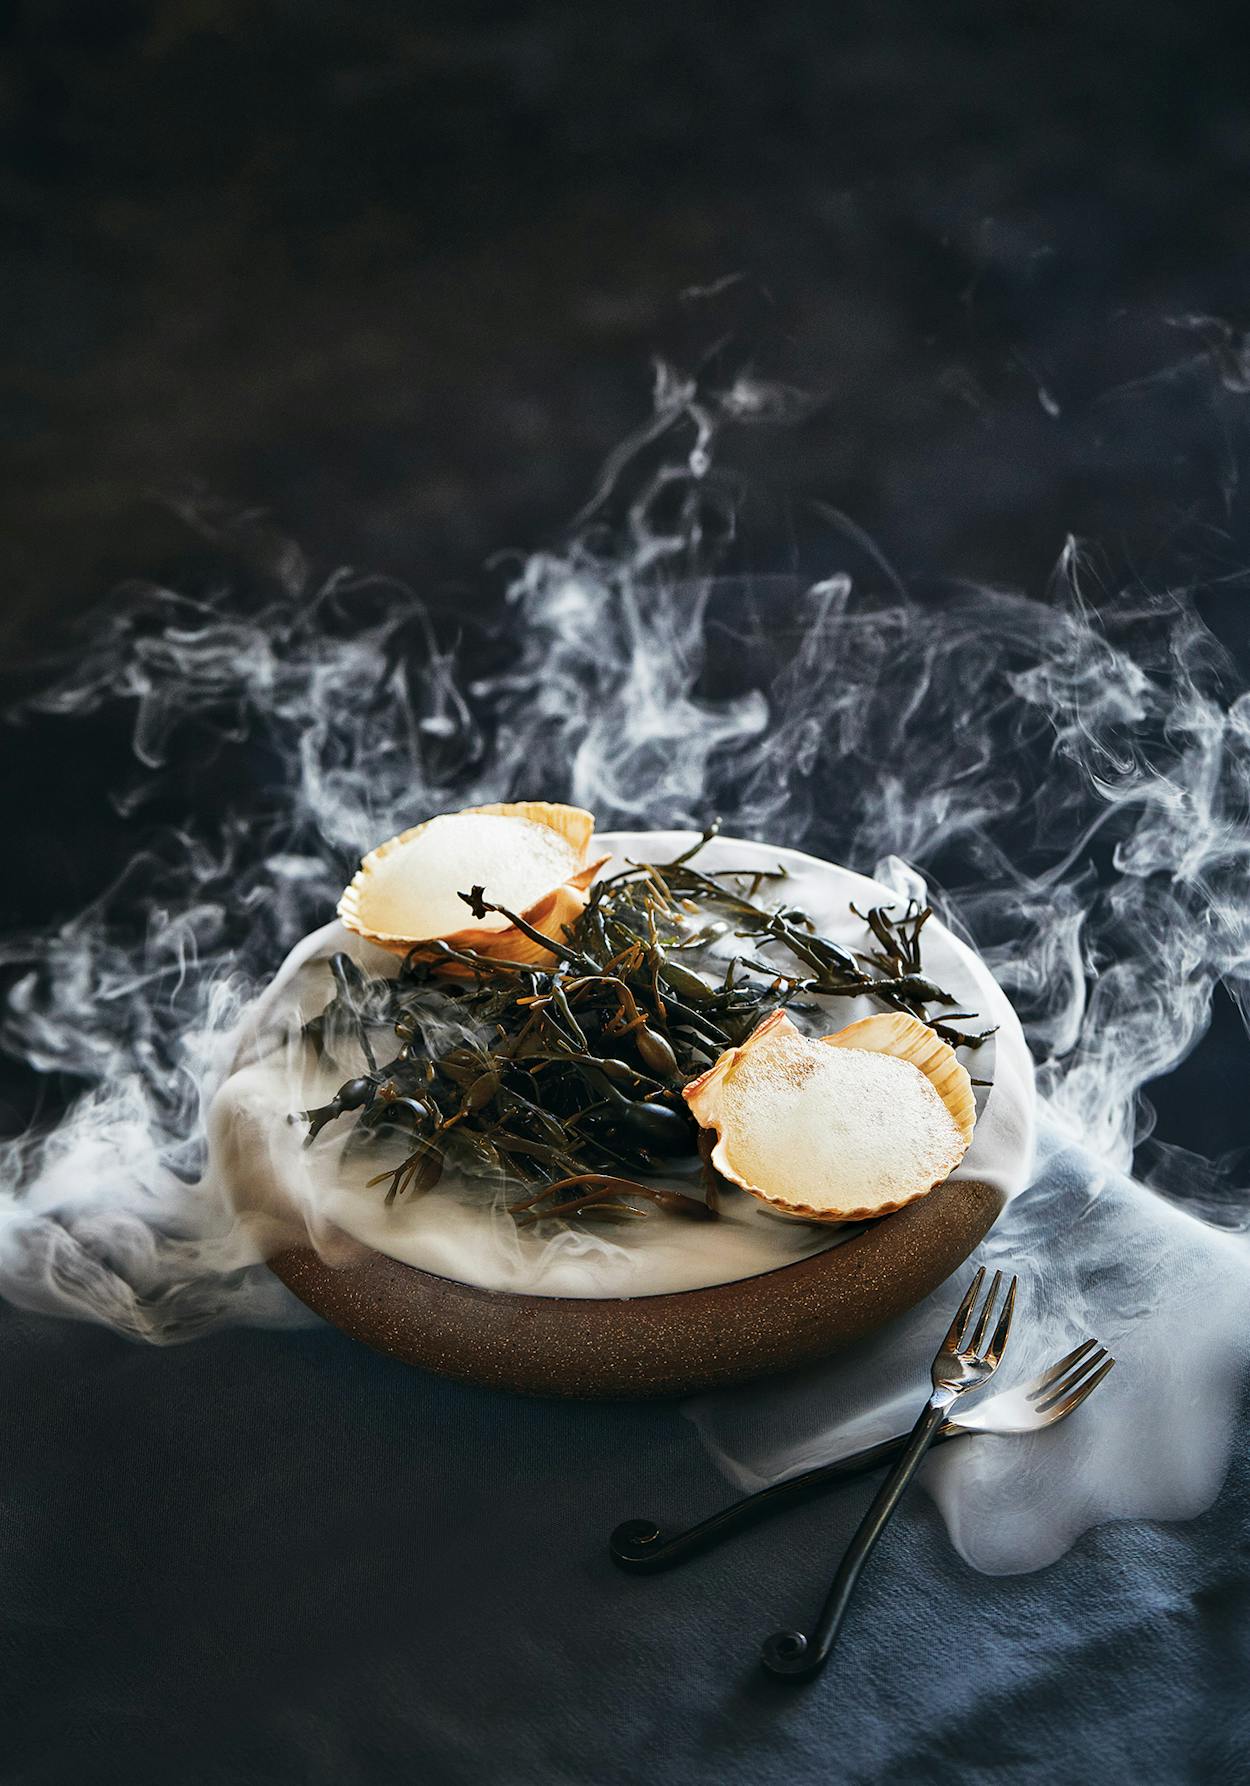 Butter-poached bay scallops served over seaweed and dry ice.